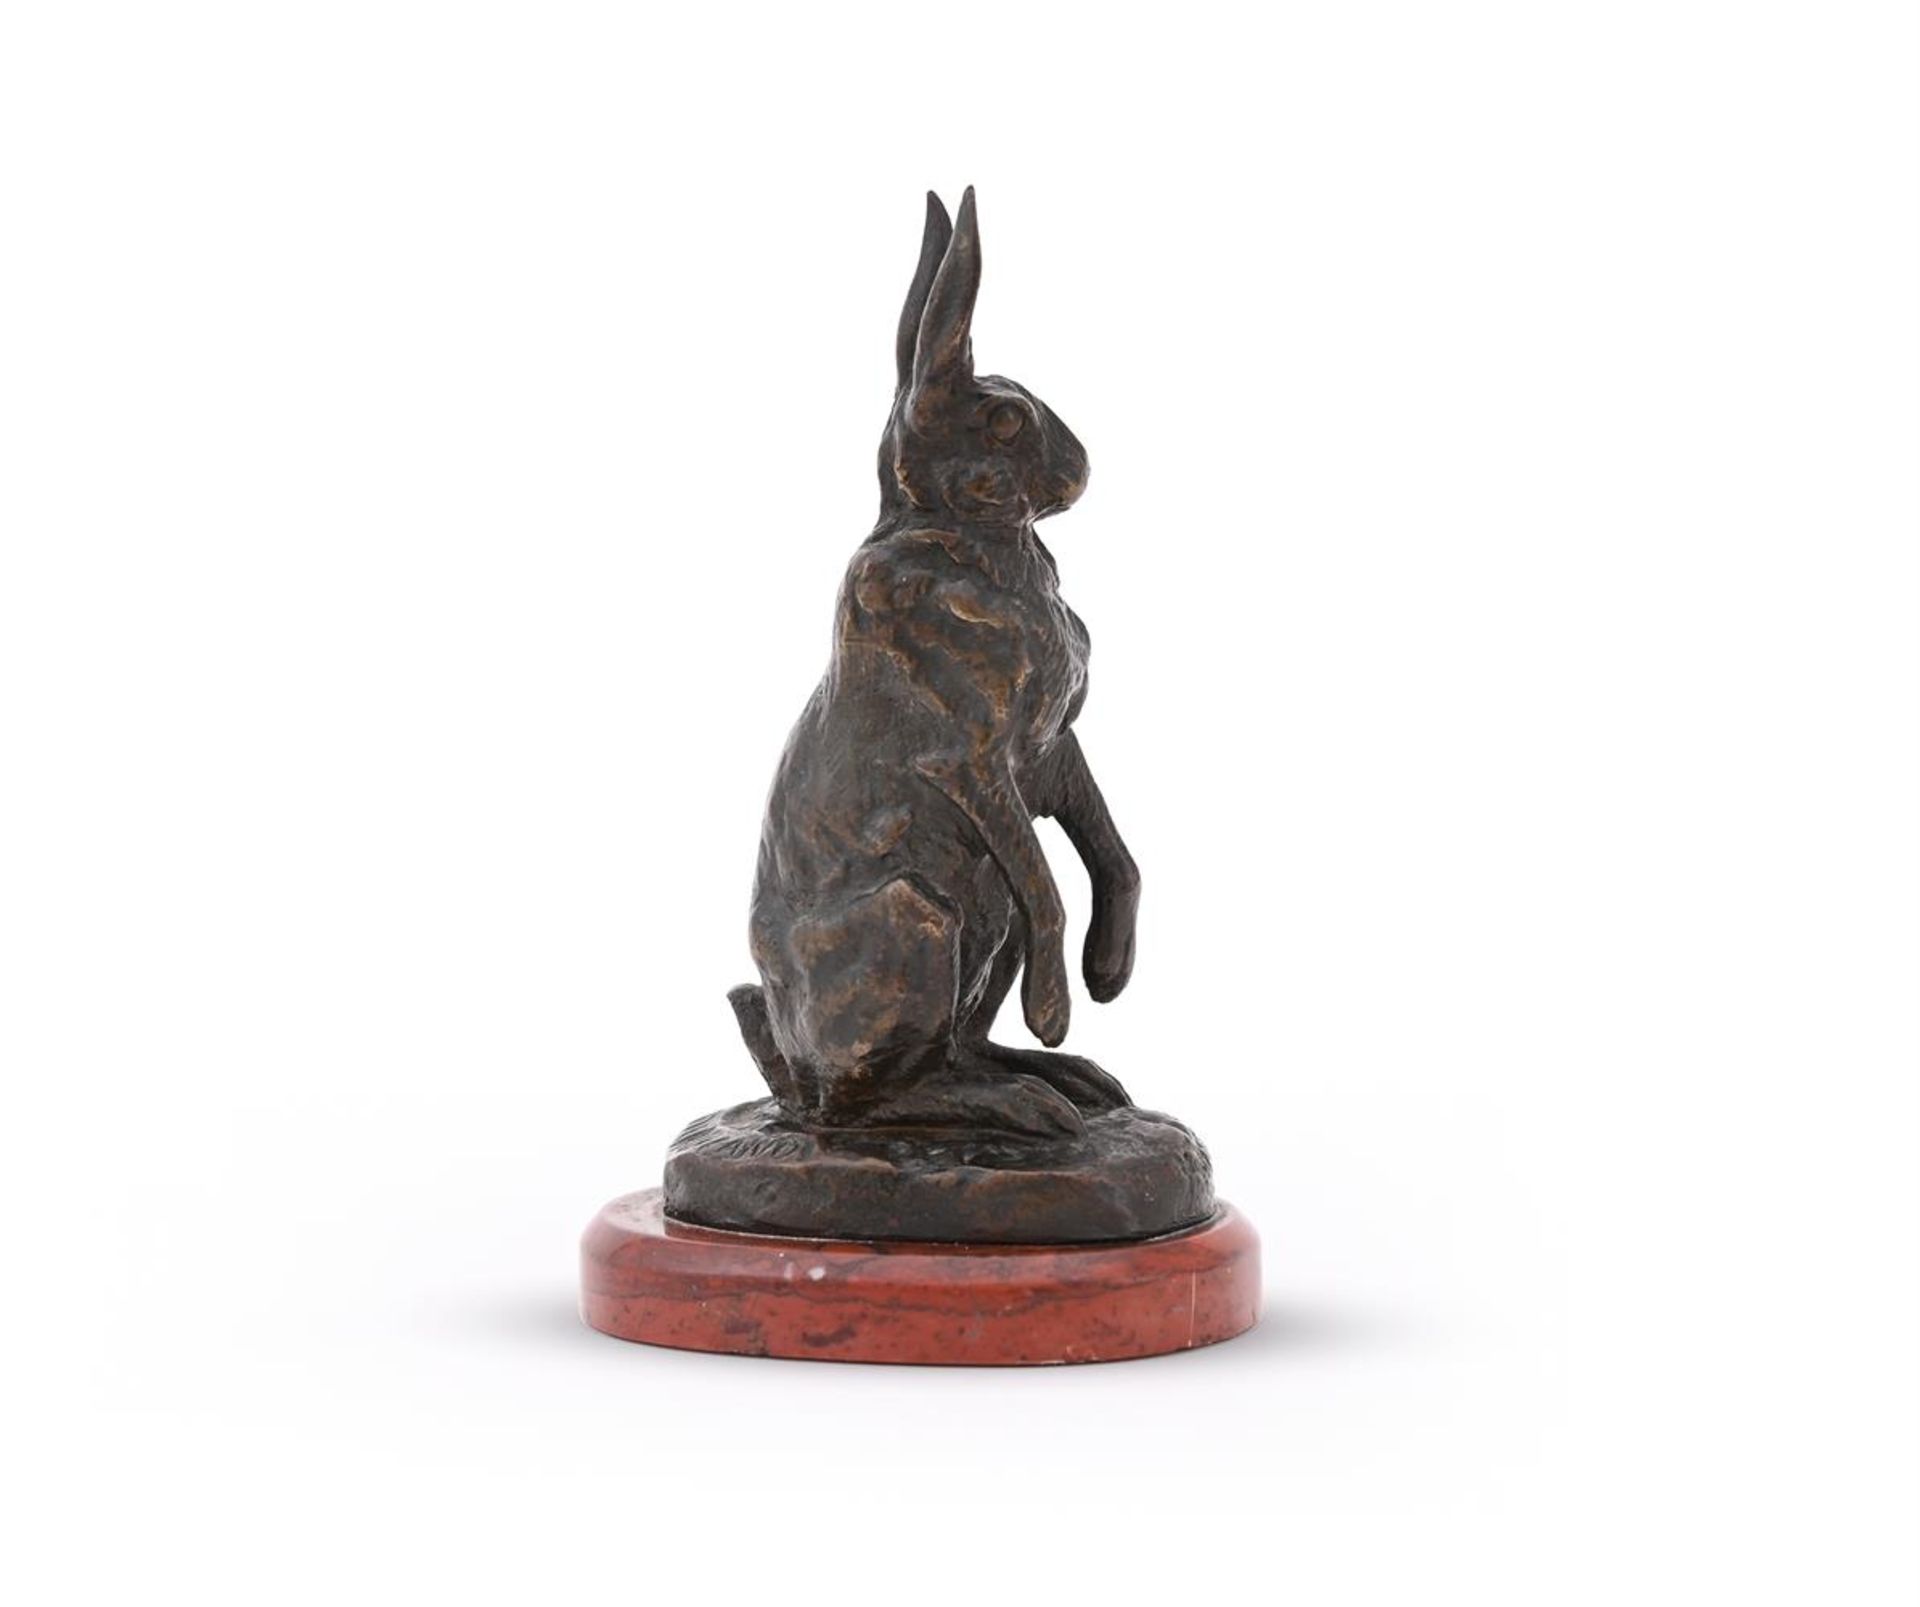 ALFRED DUBUCAND (FRENCH, 1828-1894), A BRONZE MODEL OF AN ALERT HARE - Image 3 of 6